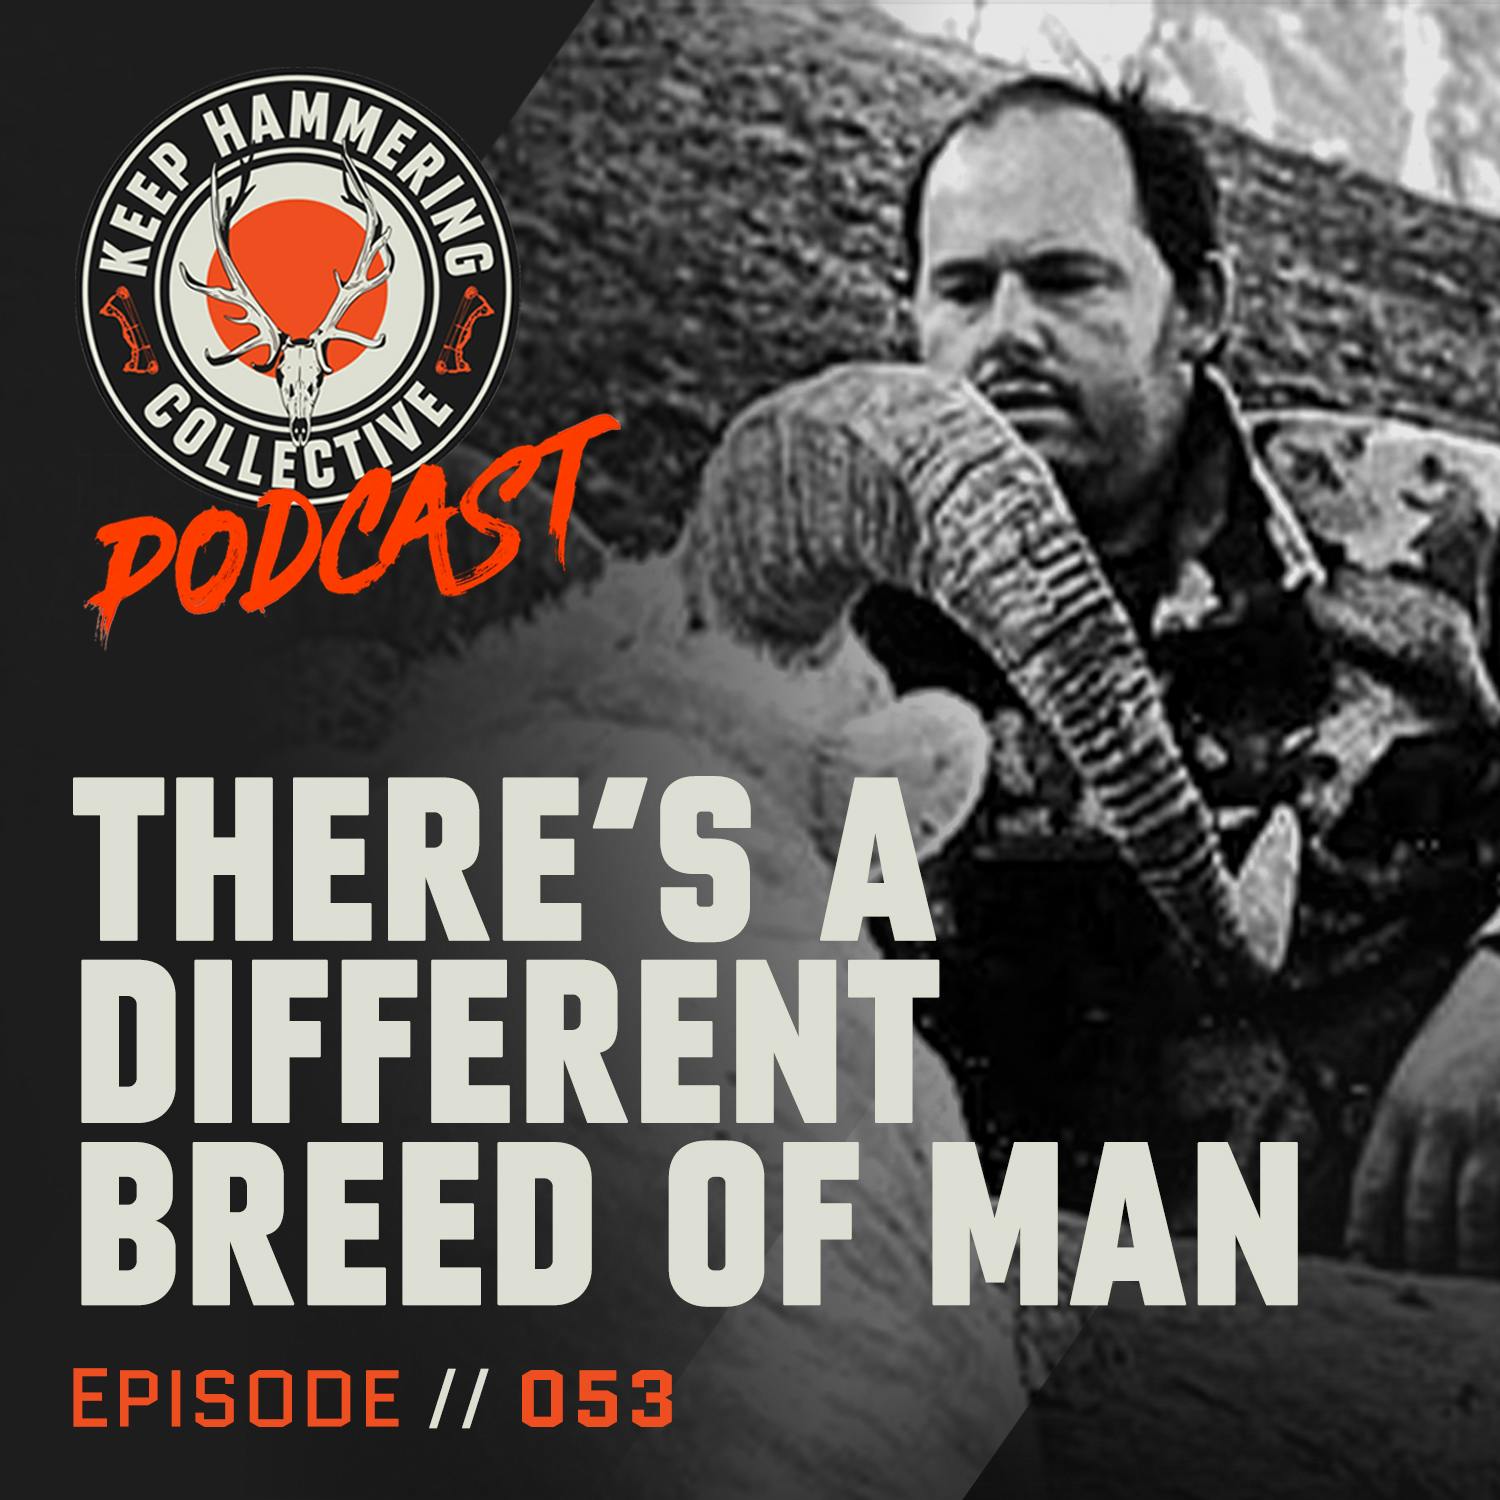 KHC 053 - There’s A Different Breed of Man